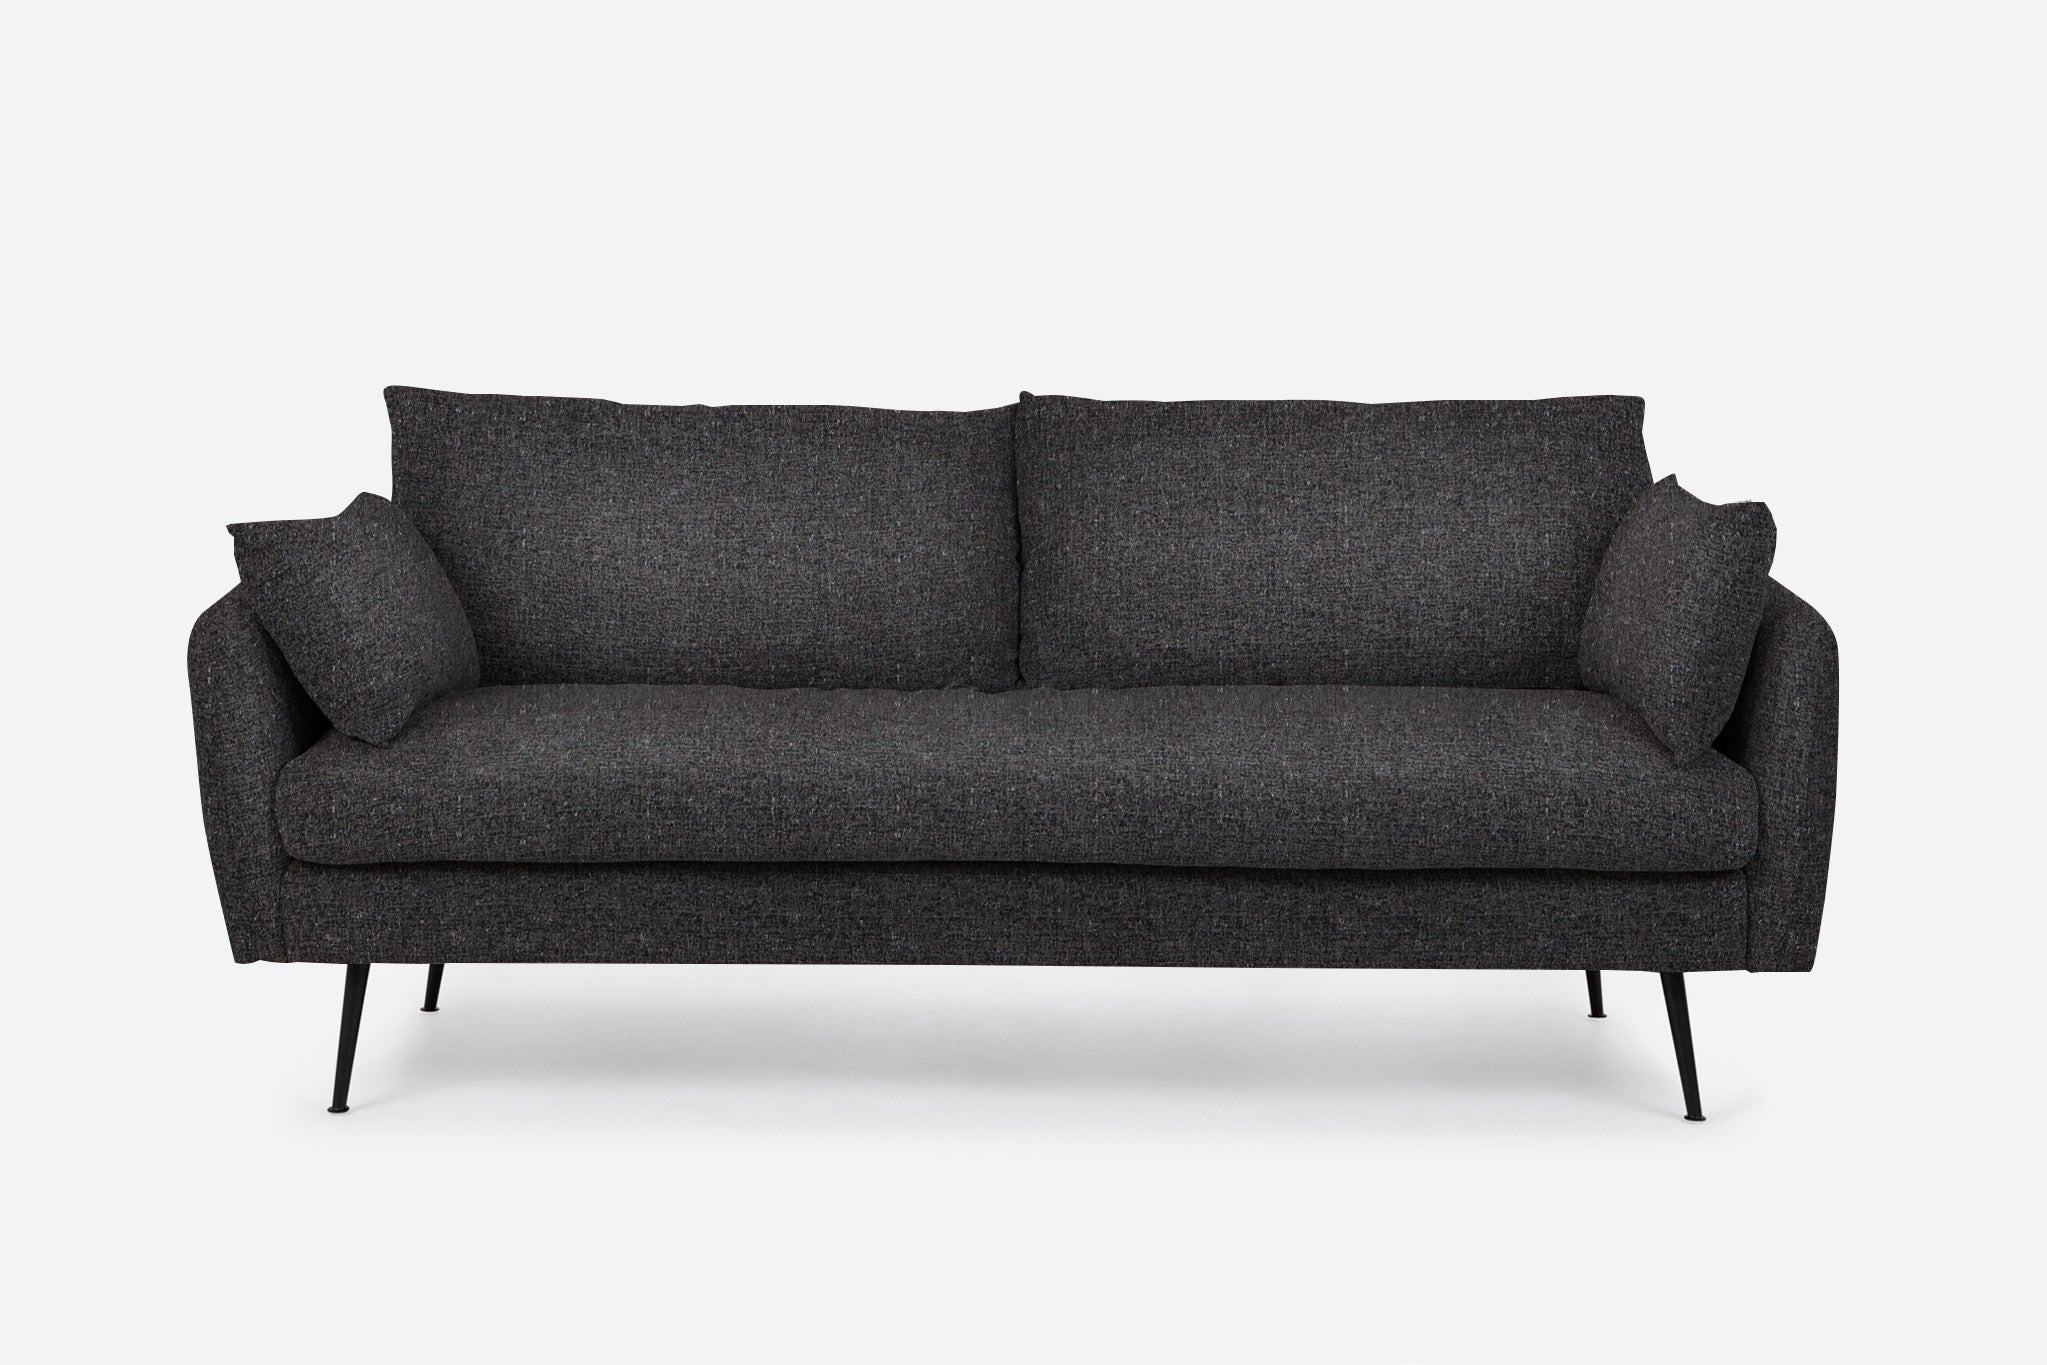 park sofa shown in charcoal with black legs